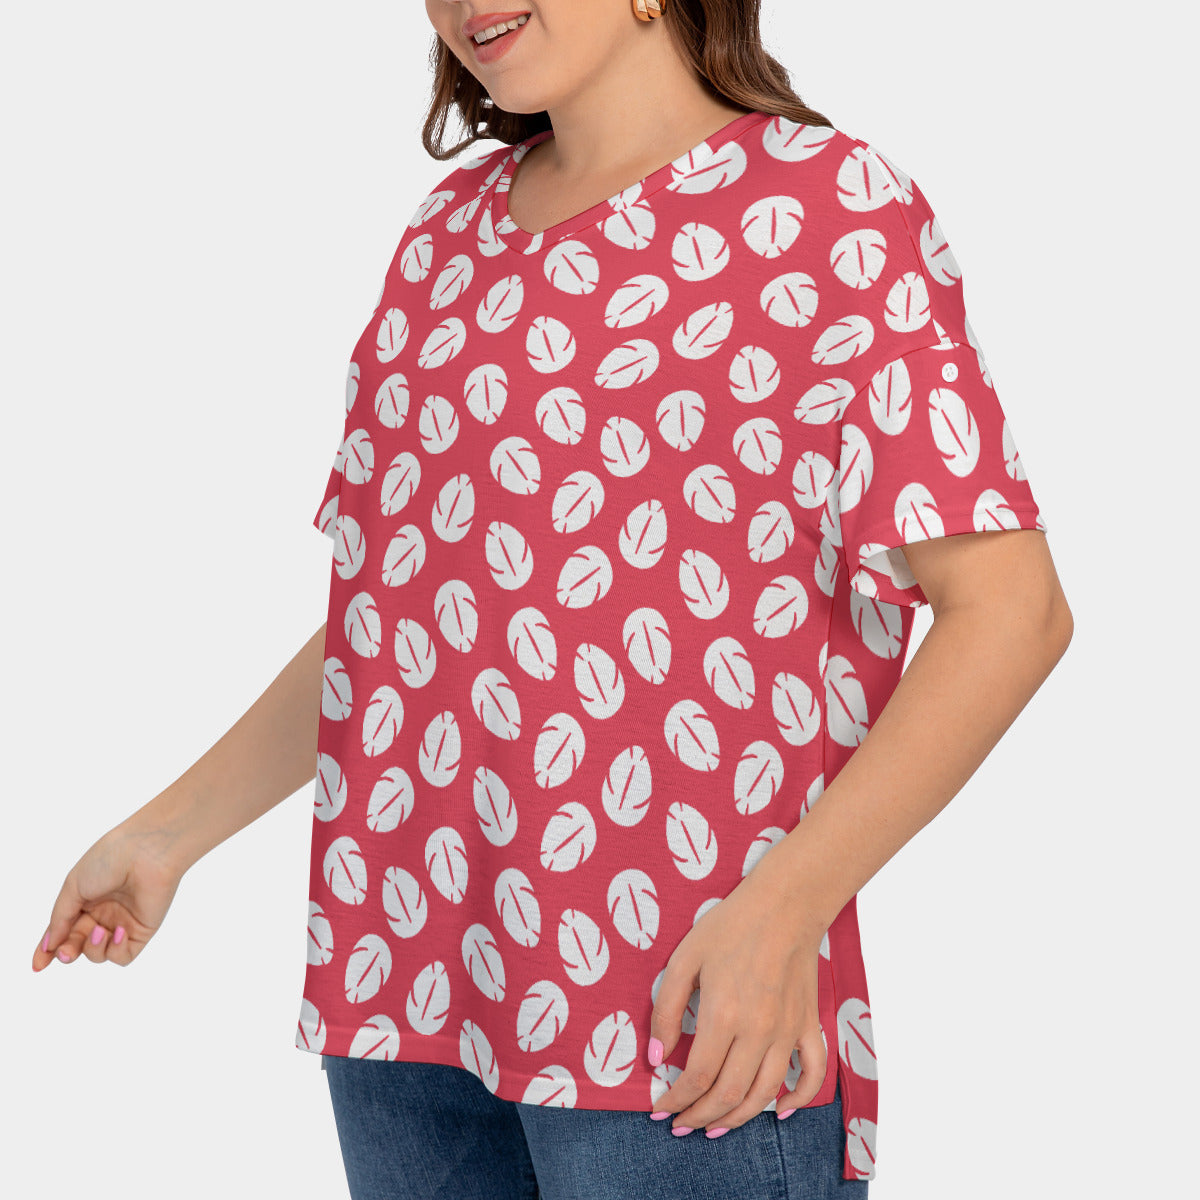 Lilo's Dress Women's Plus Size Short Sleeve T-shirt With Sleeve Loops